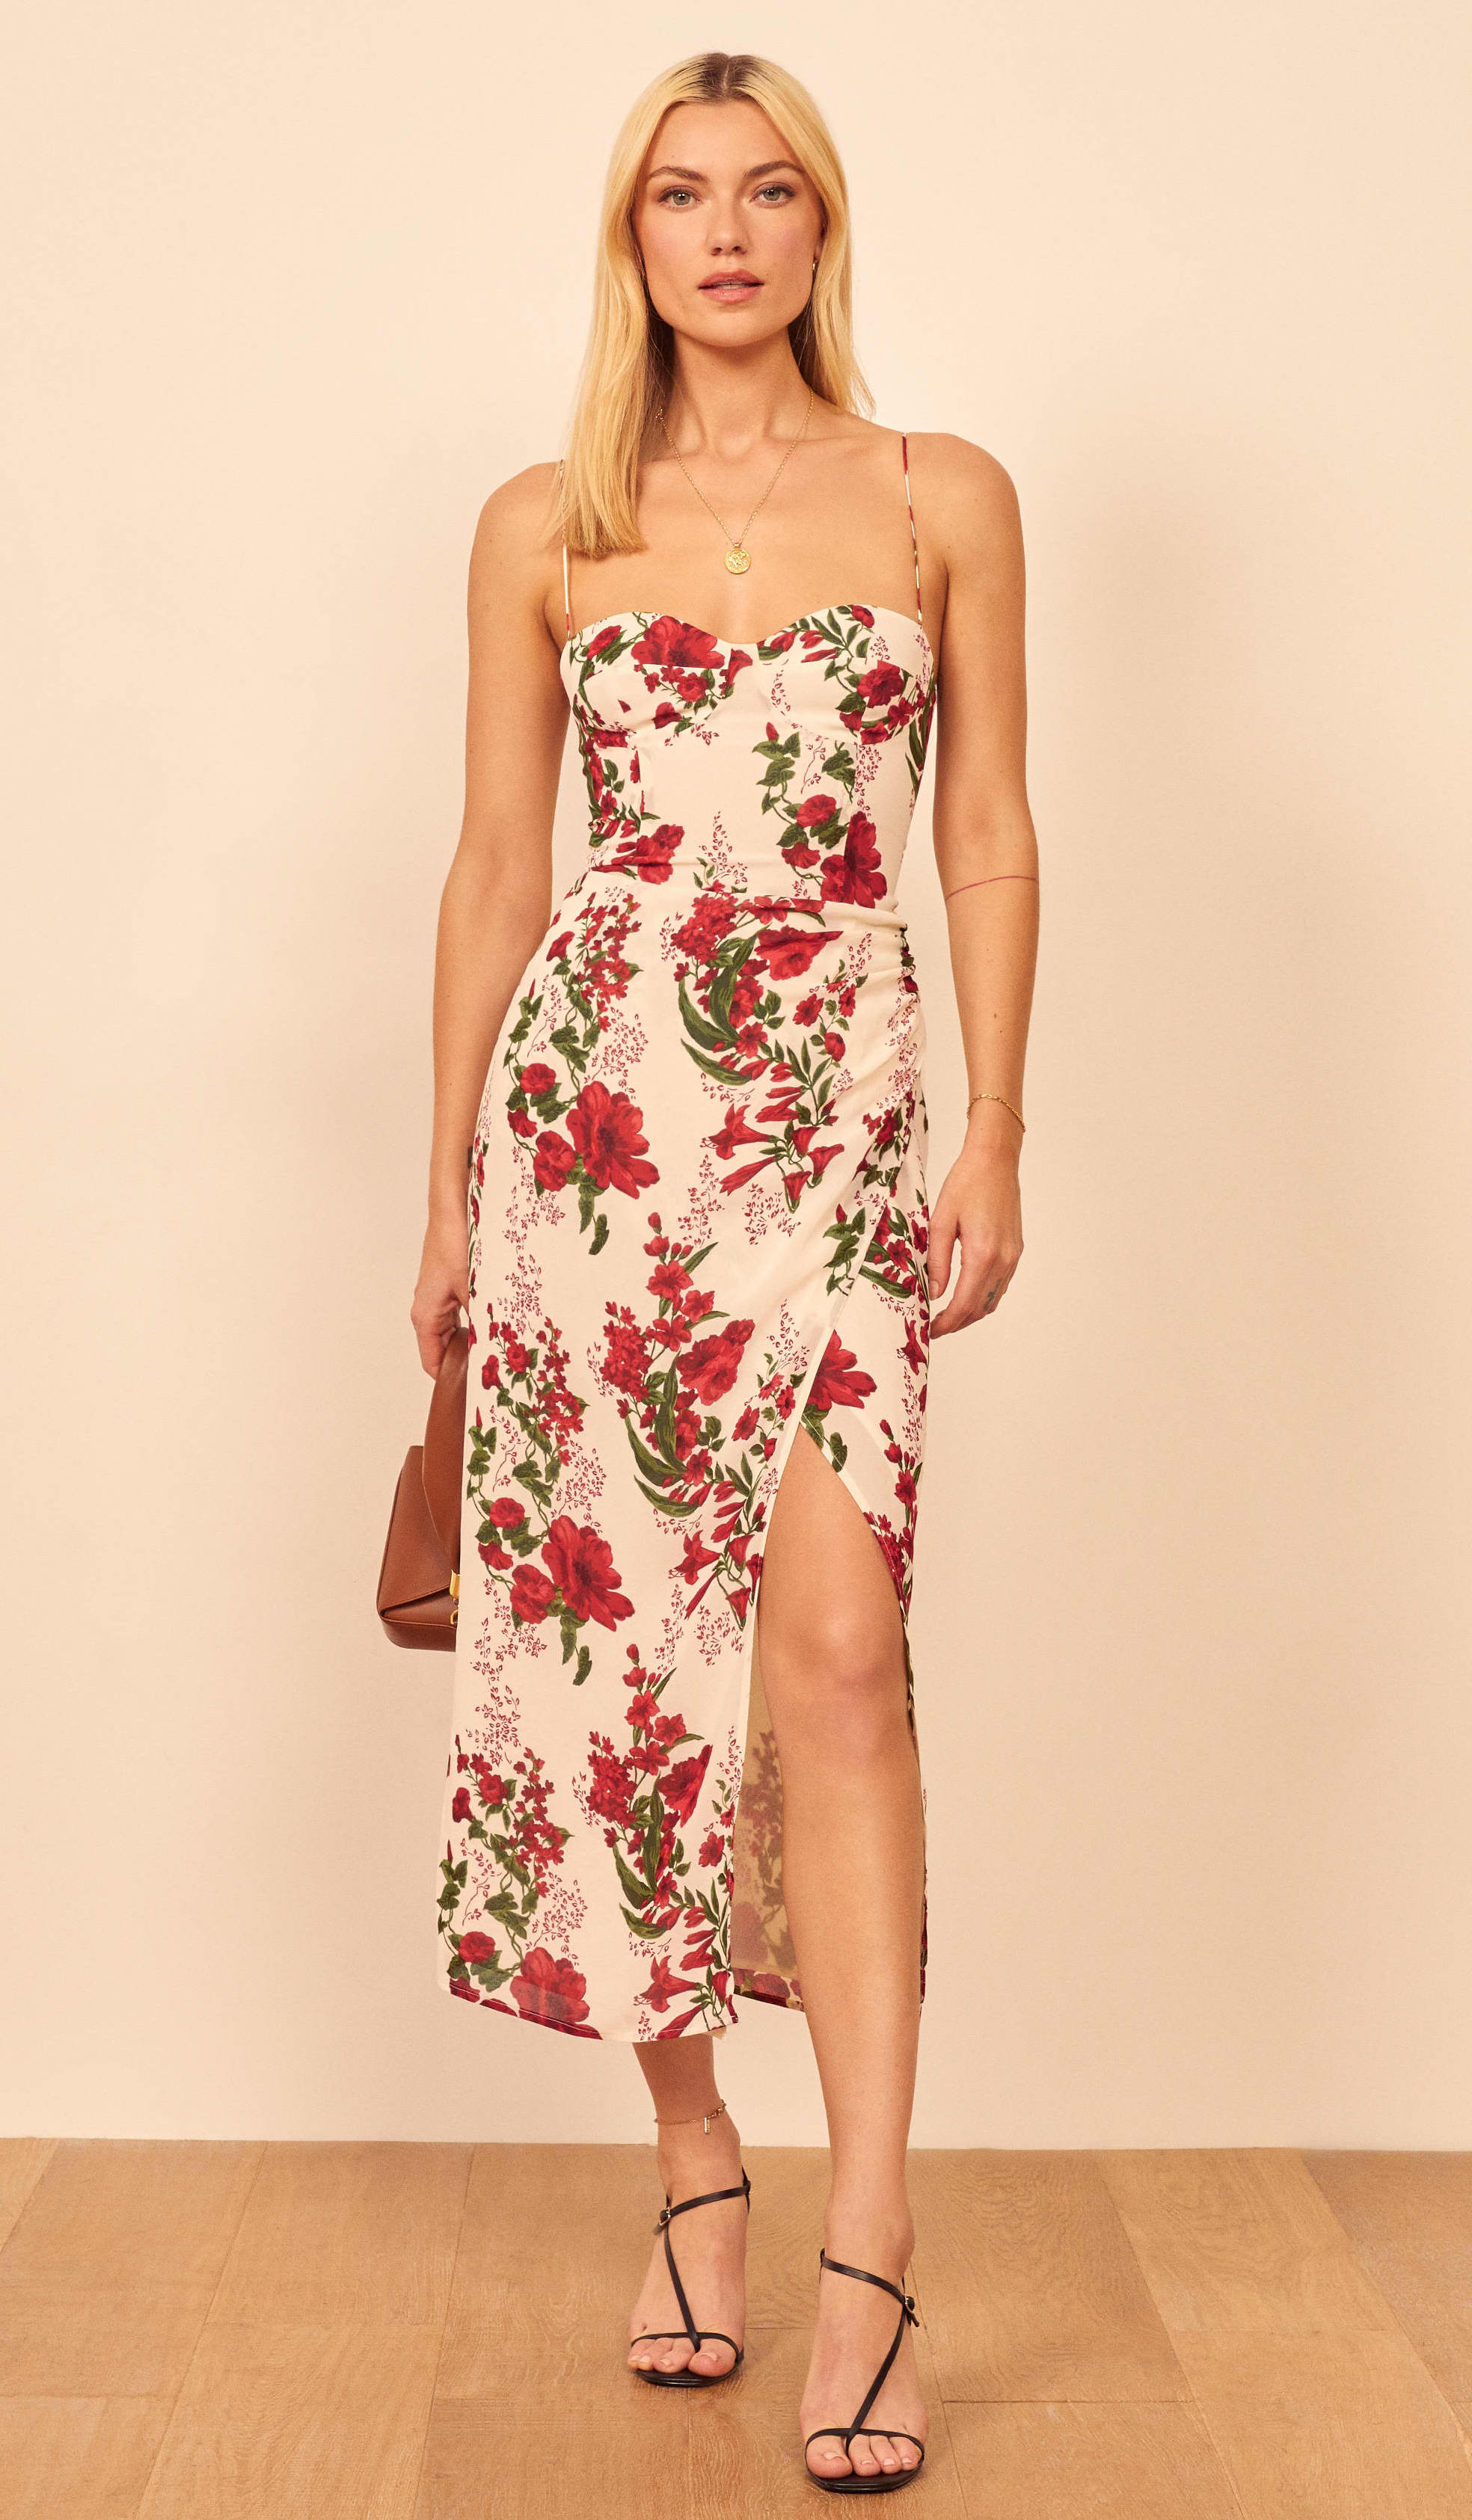 The Best Spring Dresses for 2020 From Revolve, Reformation, Free People ...